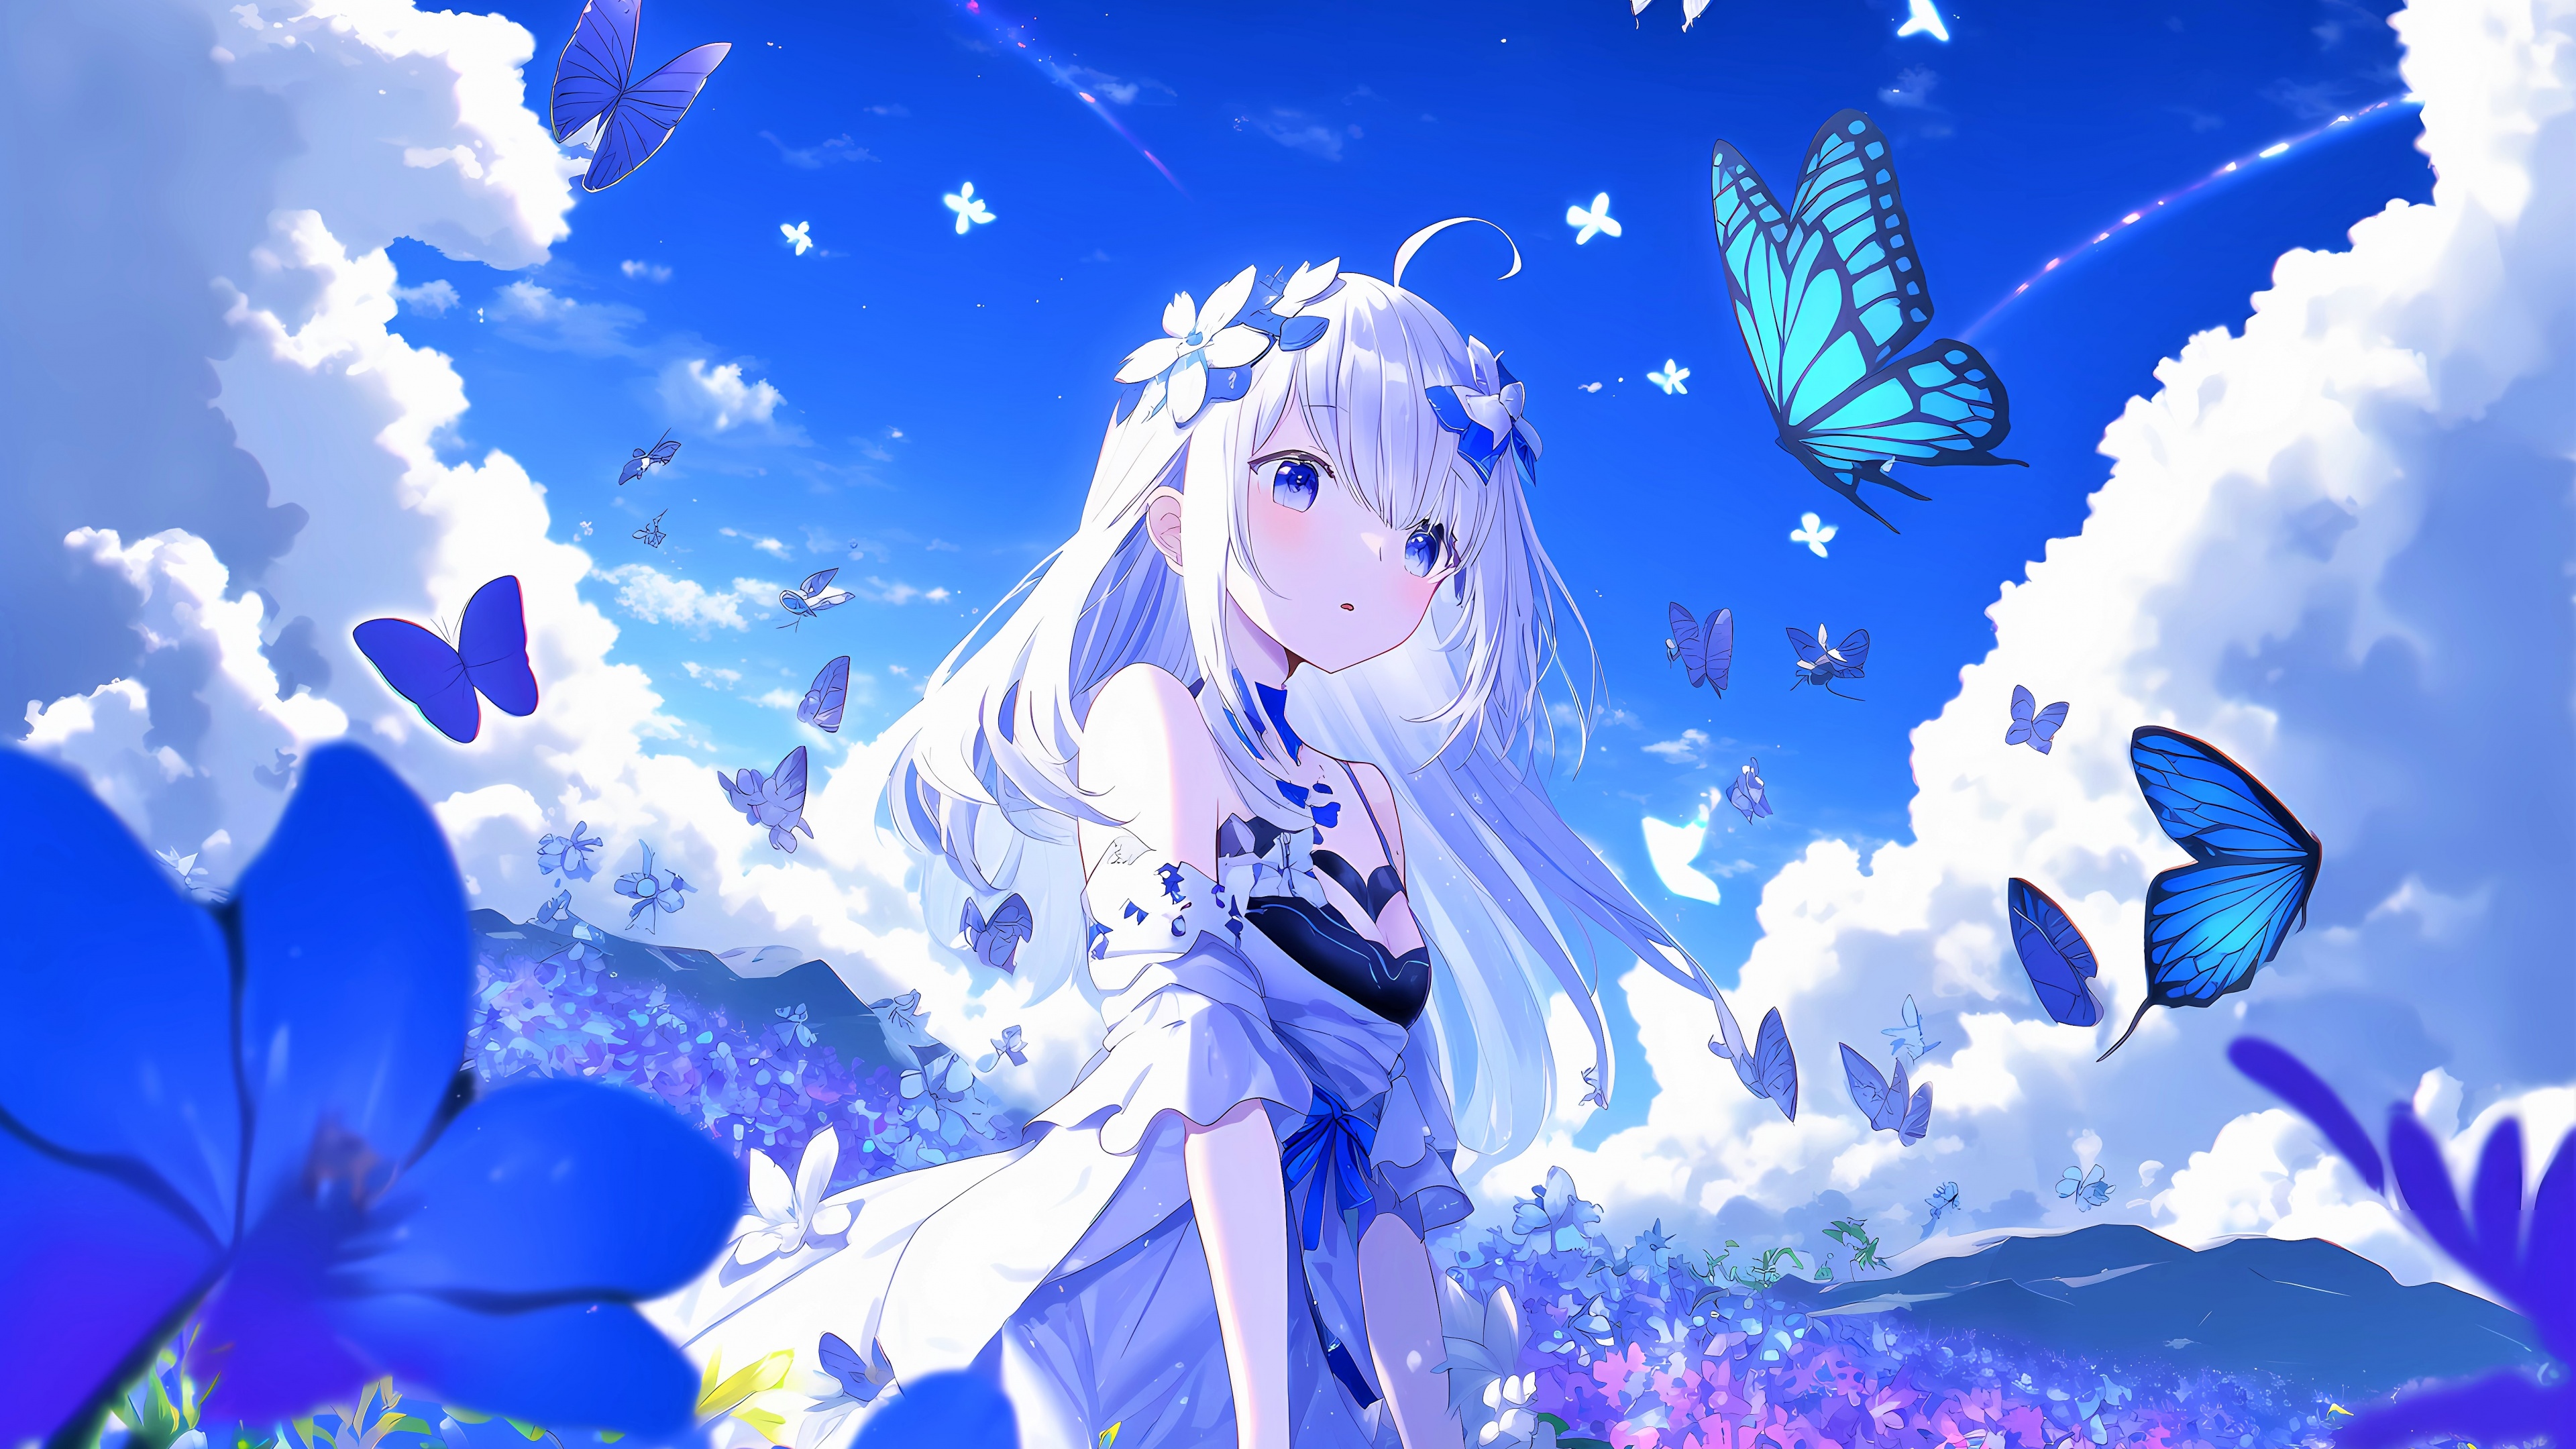 100+] Beautiful Anime Pictures | Wallpapers.com